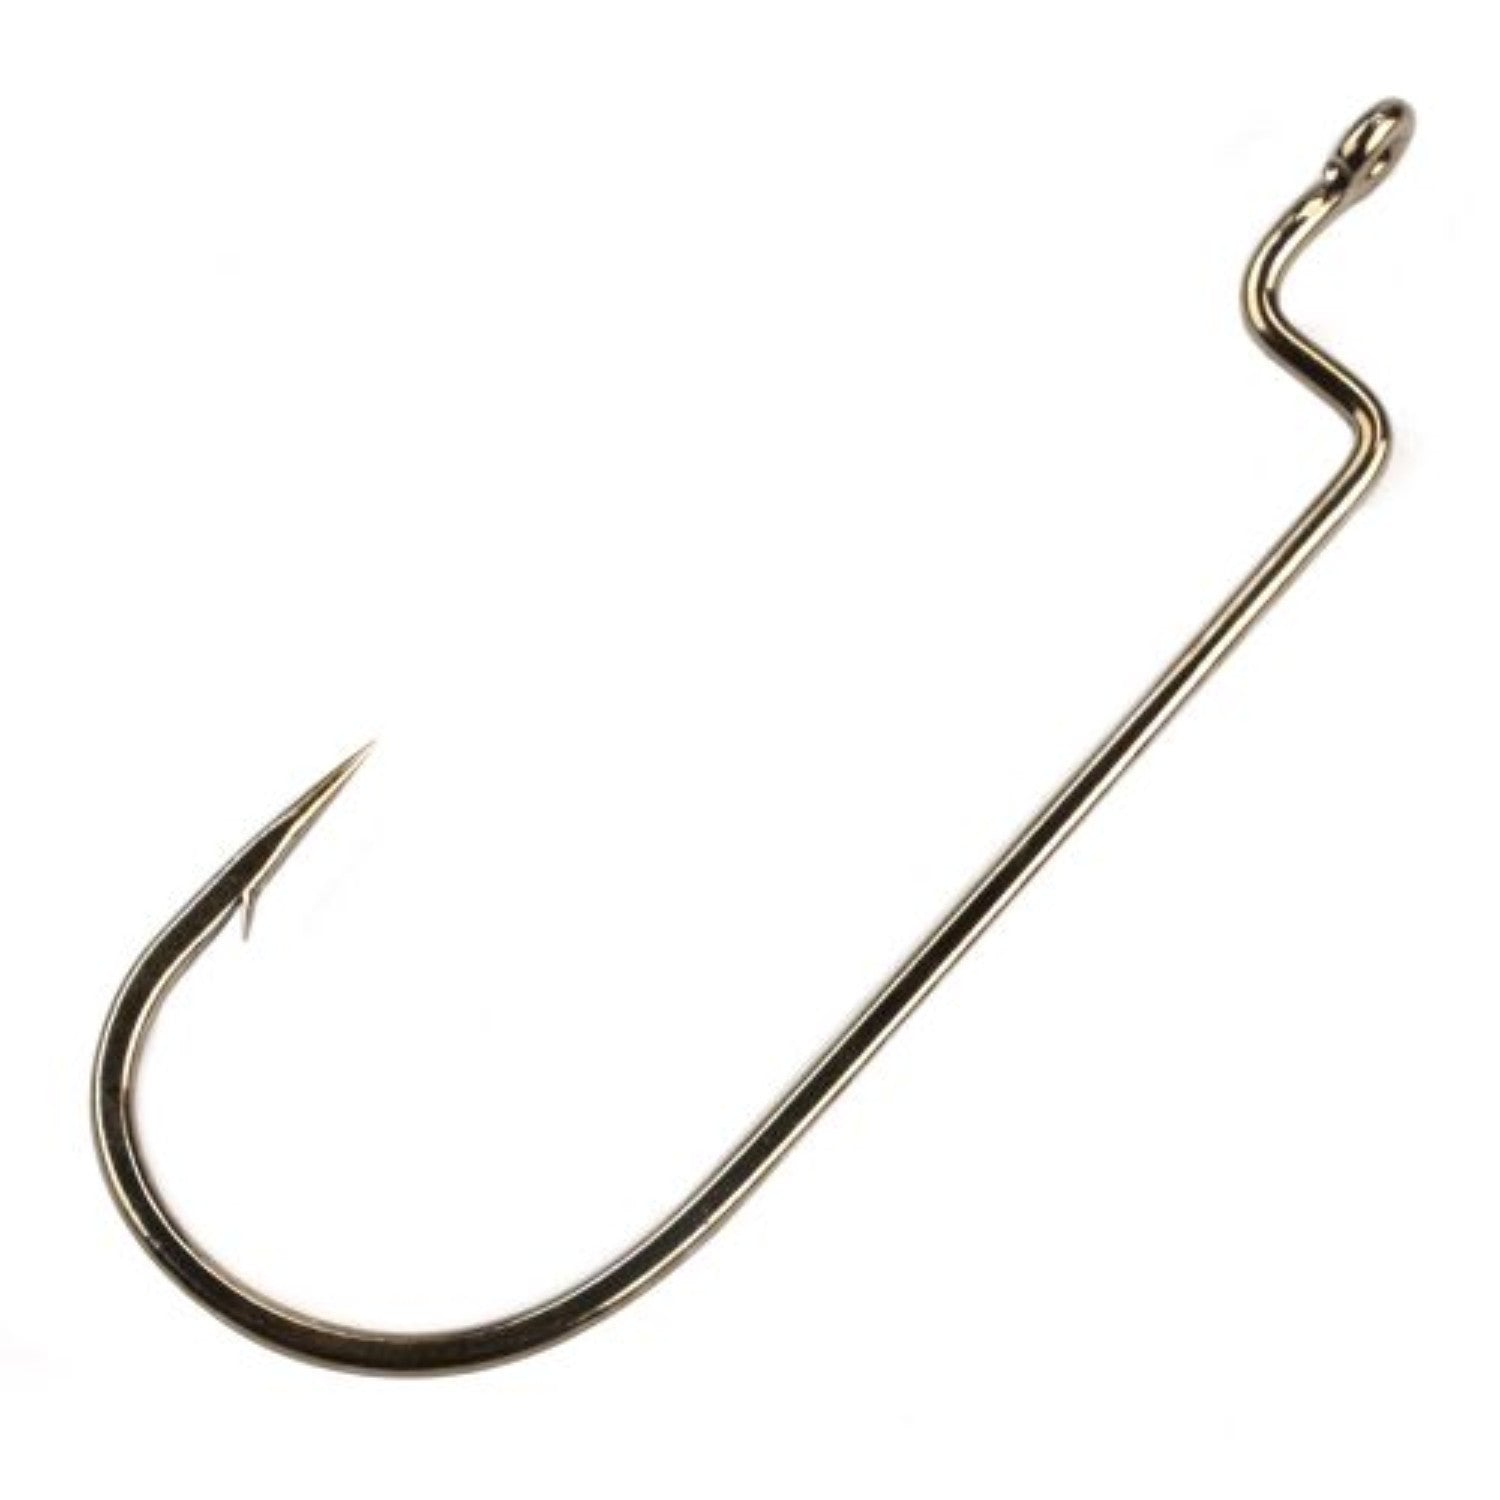 Gamakatsu Worm Offset Bronze Hook Size 3/0 25 Per Pack – Fishing in the USA